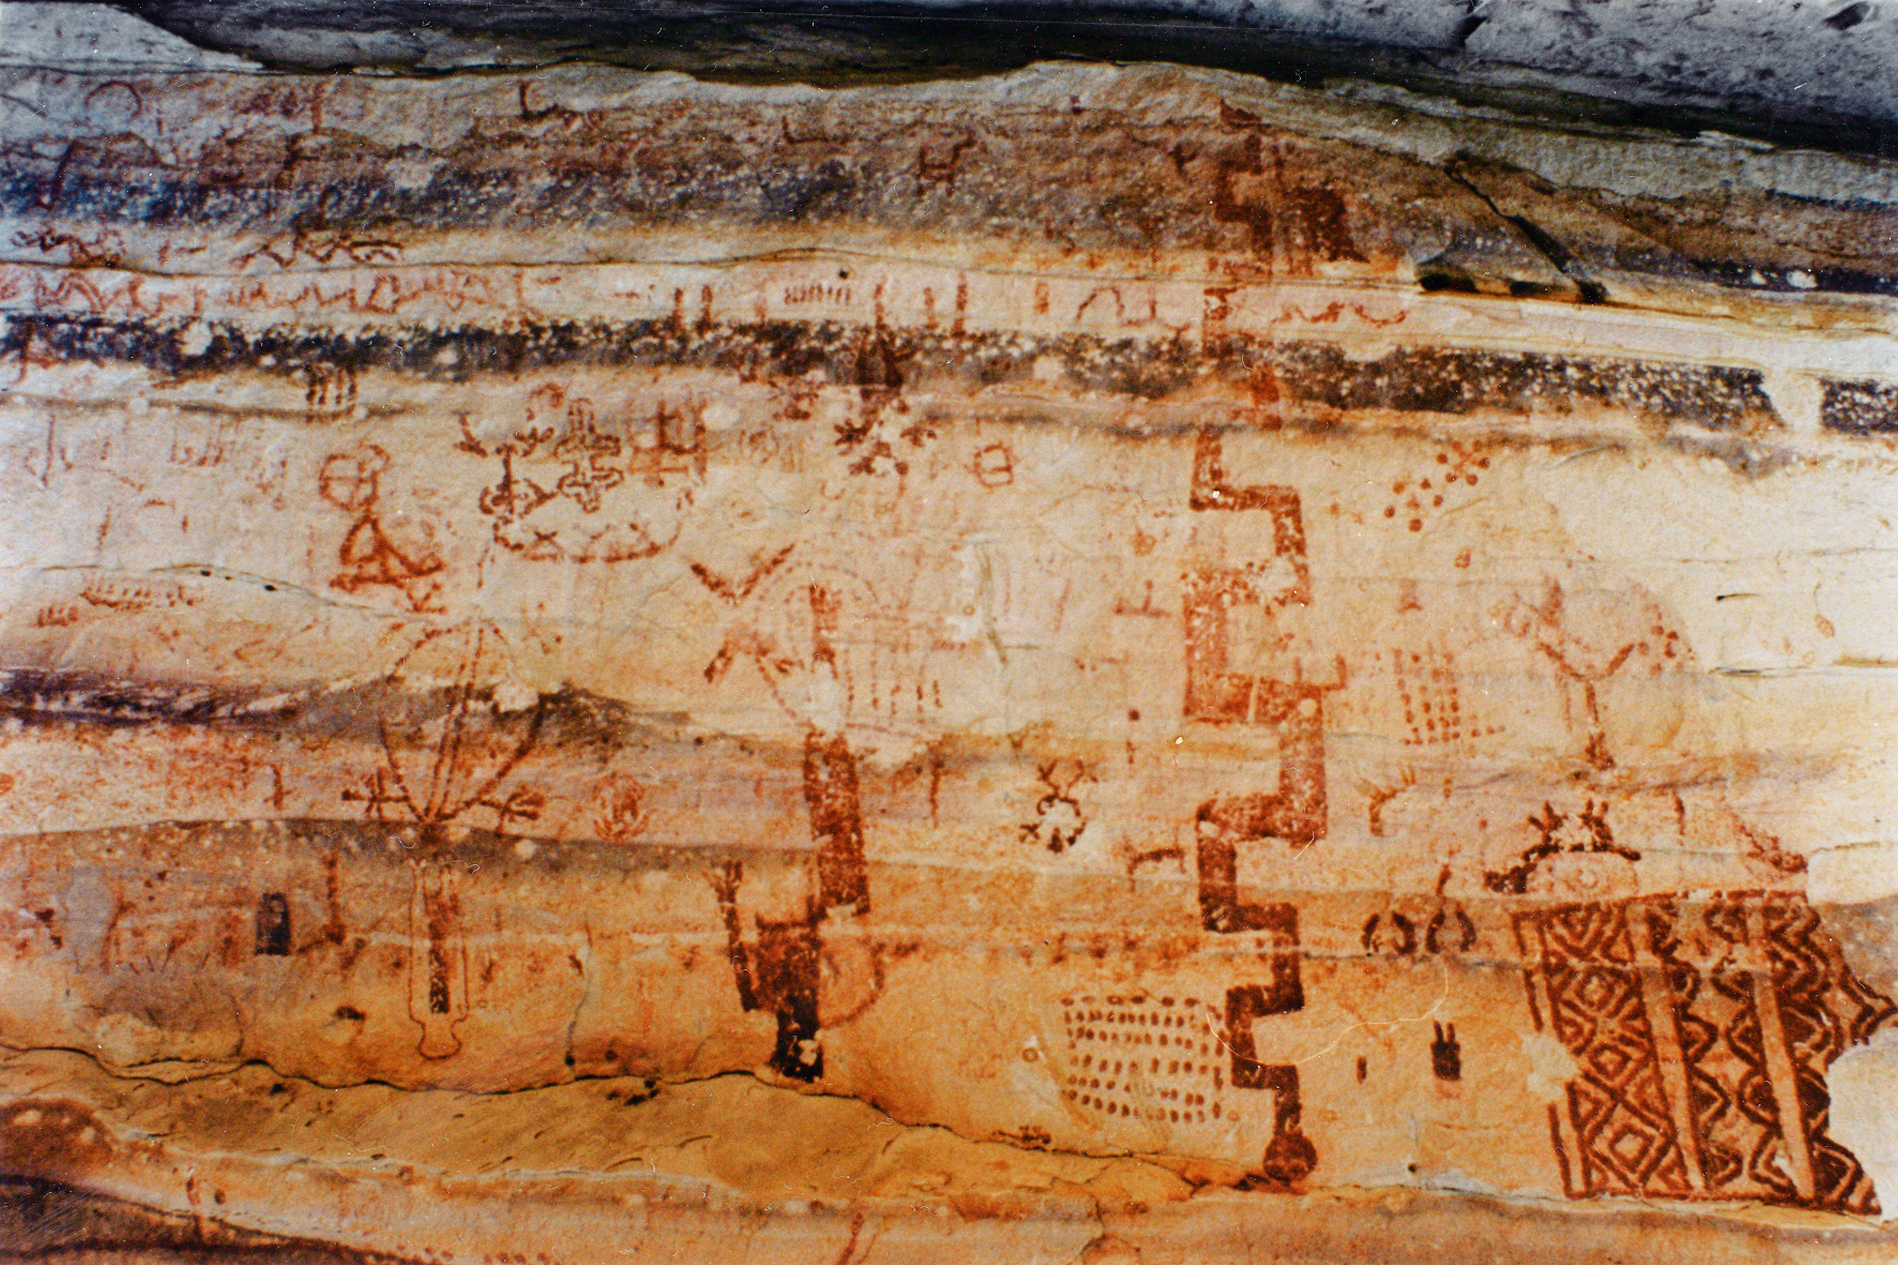 SIARB Bolivia Bolivian Rock Art Research Society